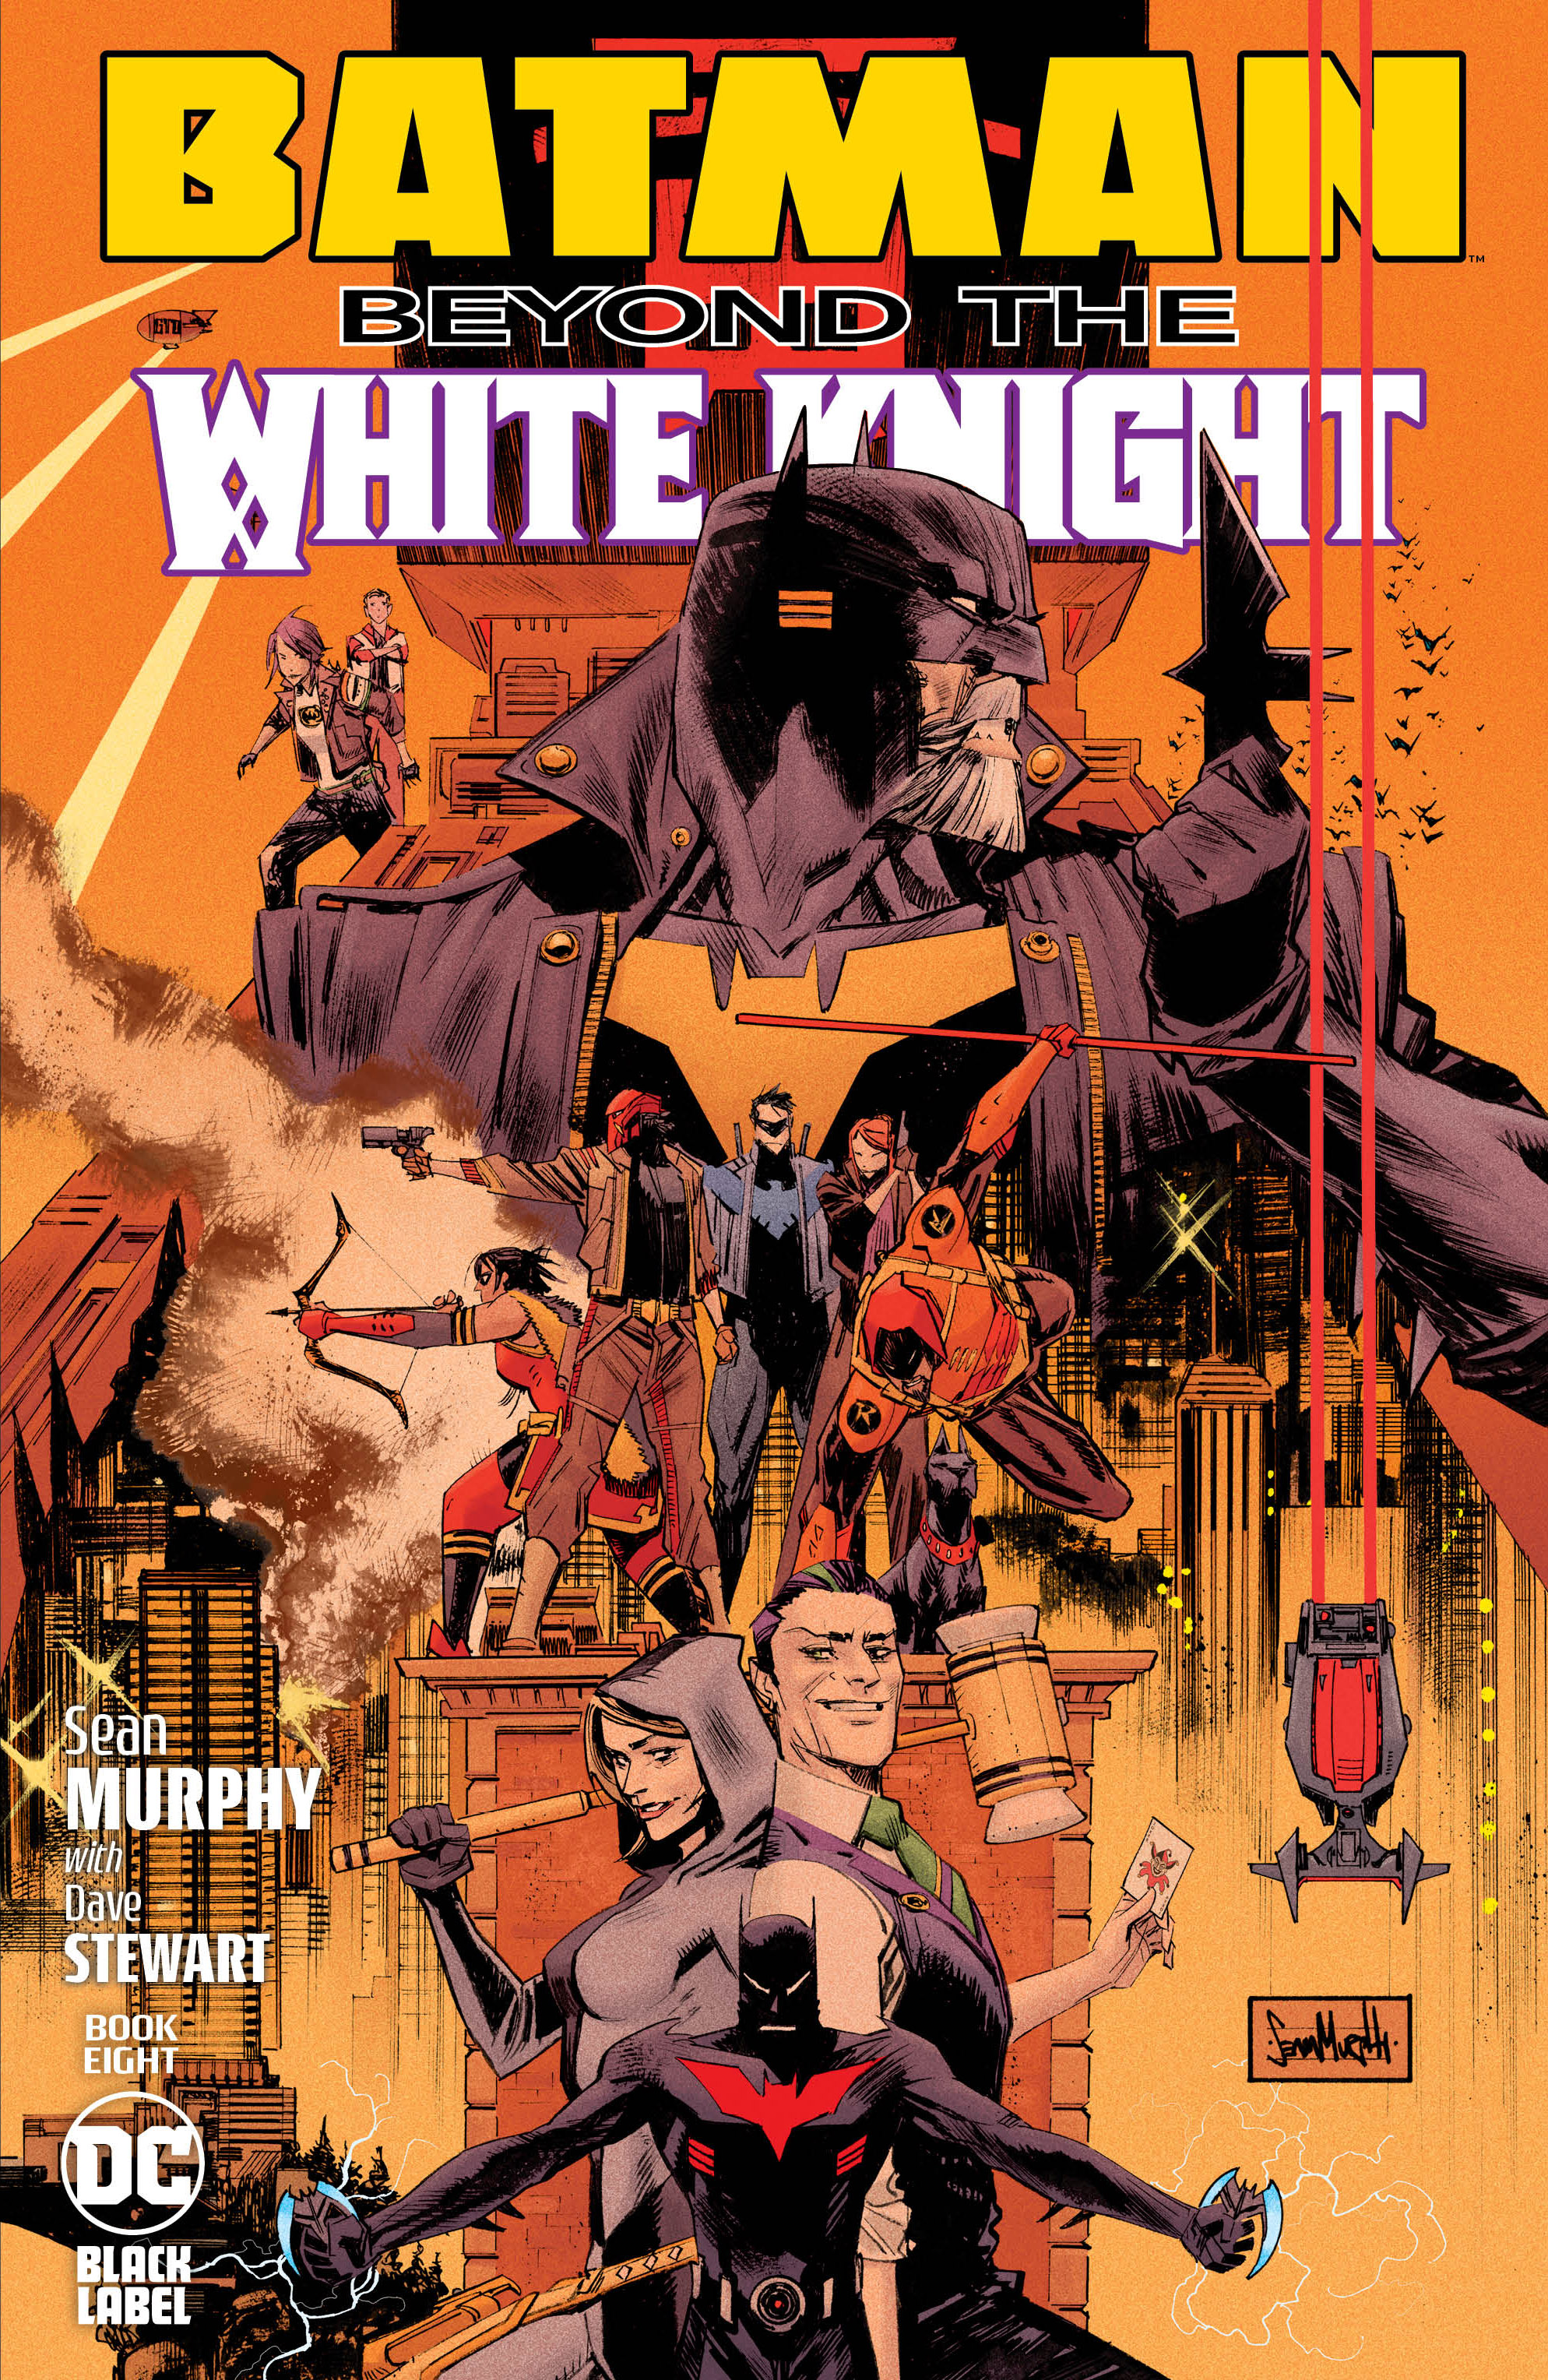 DC: Batman: Beyond The White Knight #8 (Cover A Sean Murphy & Dave Stewart)  from Batman: Beyond The White Knight by Sean Murphy published by DC Comics  @  - UK and